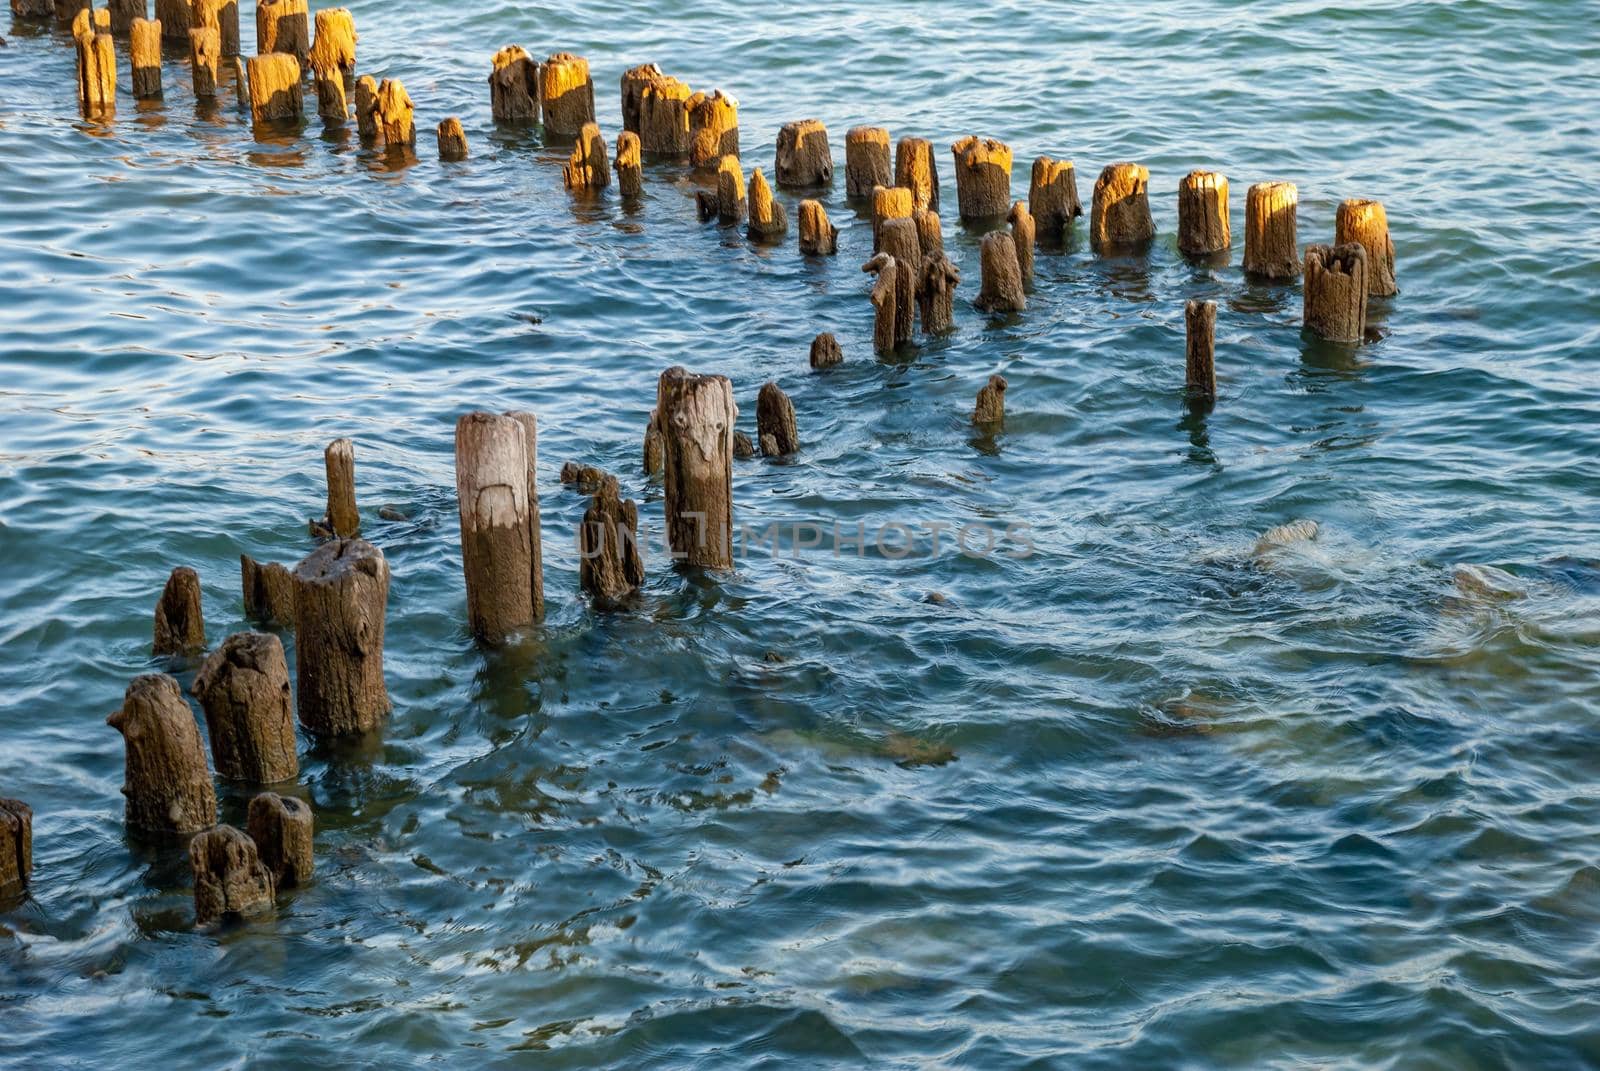 The old dock pilings in the Bodensee Lake in Germany